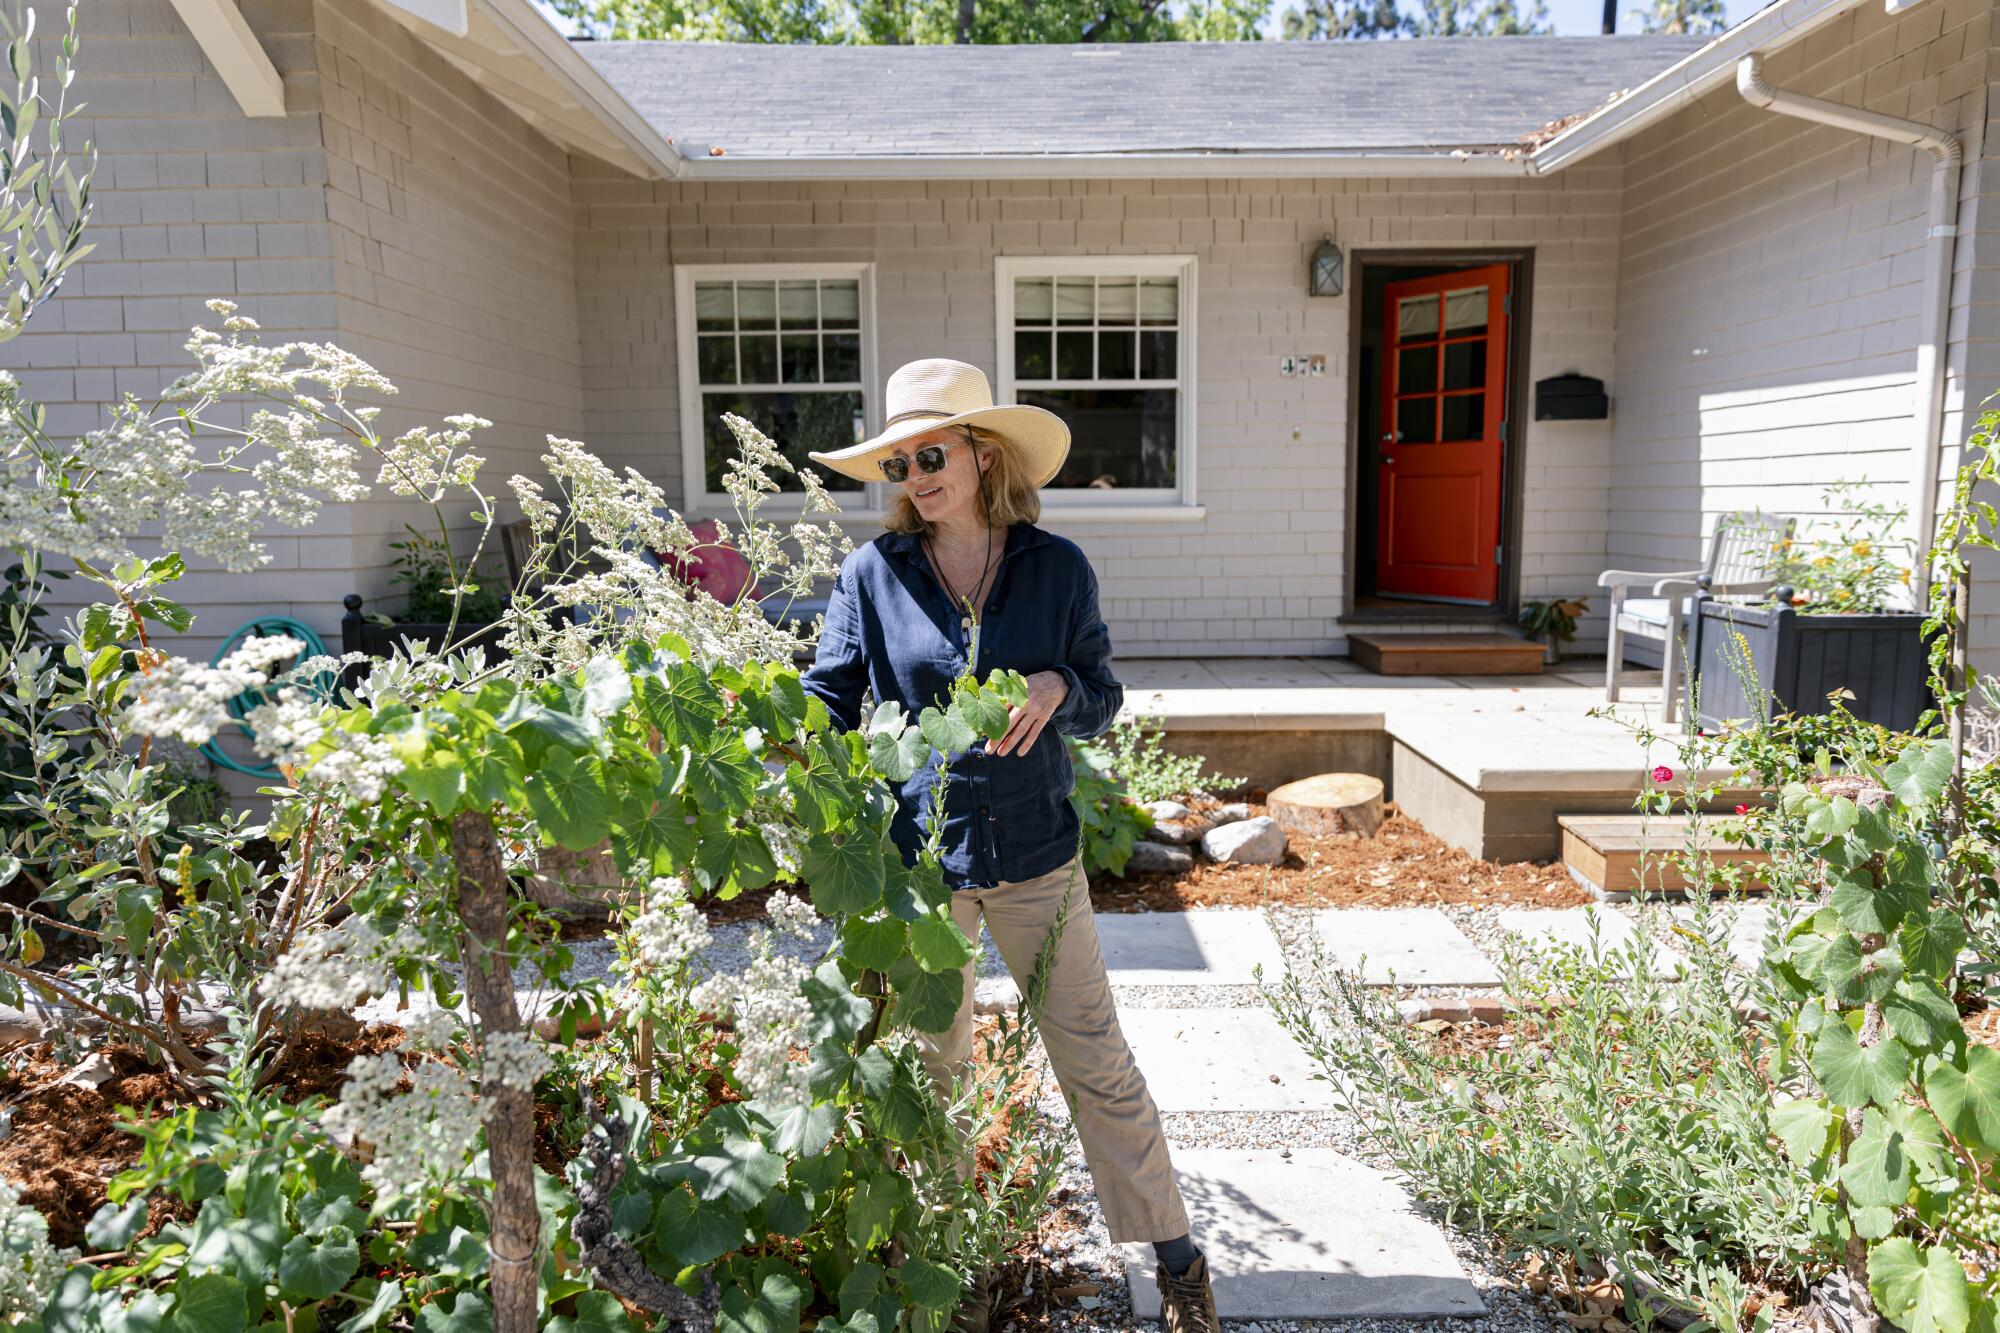 A woman tends to plants outside a house.